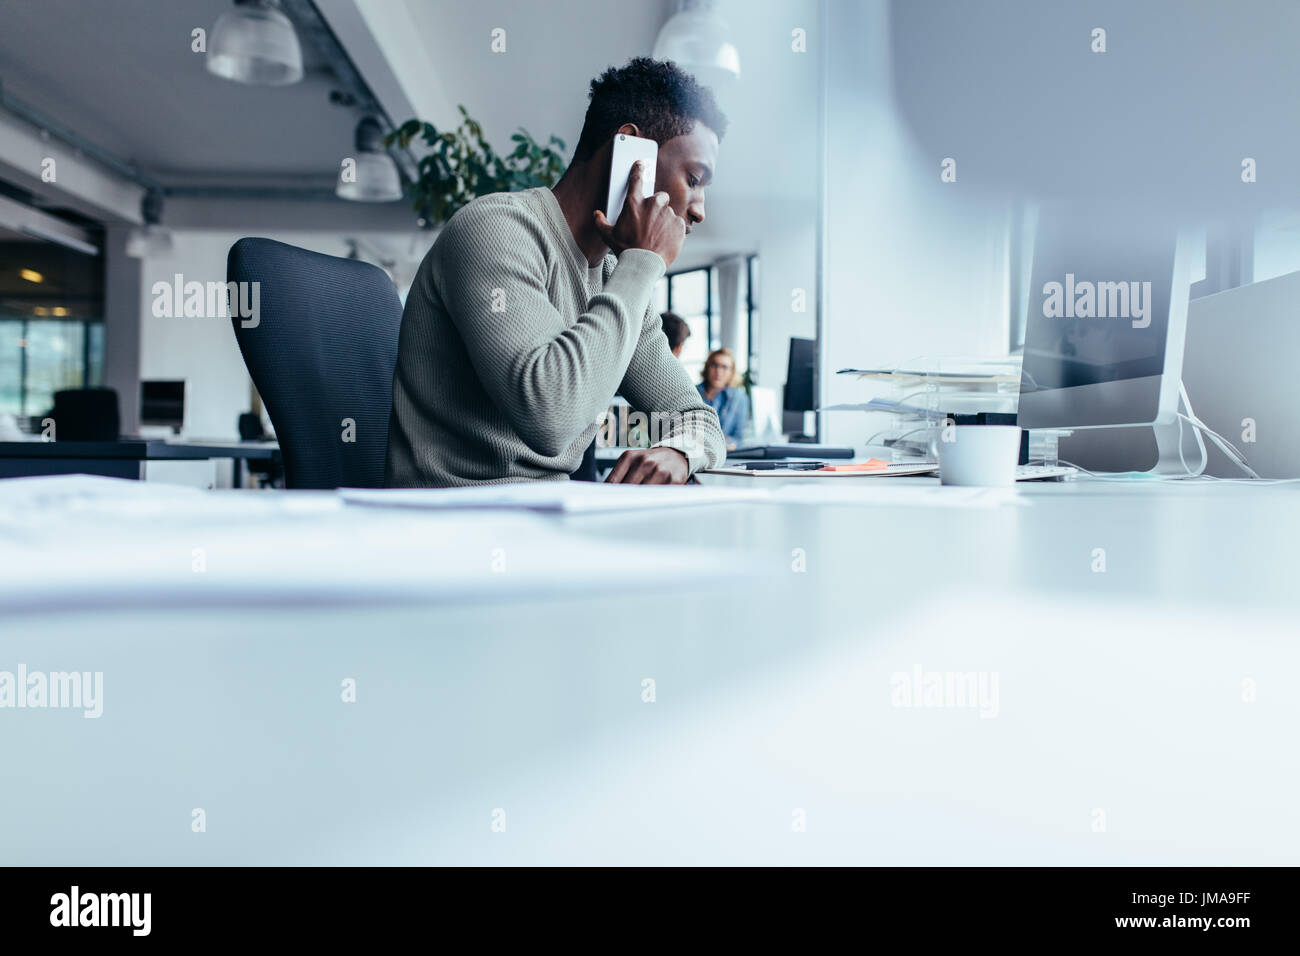 African man talking on mobile phone. Businessman sitting in modern office using cellphone. Stock Photo